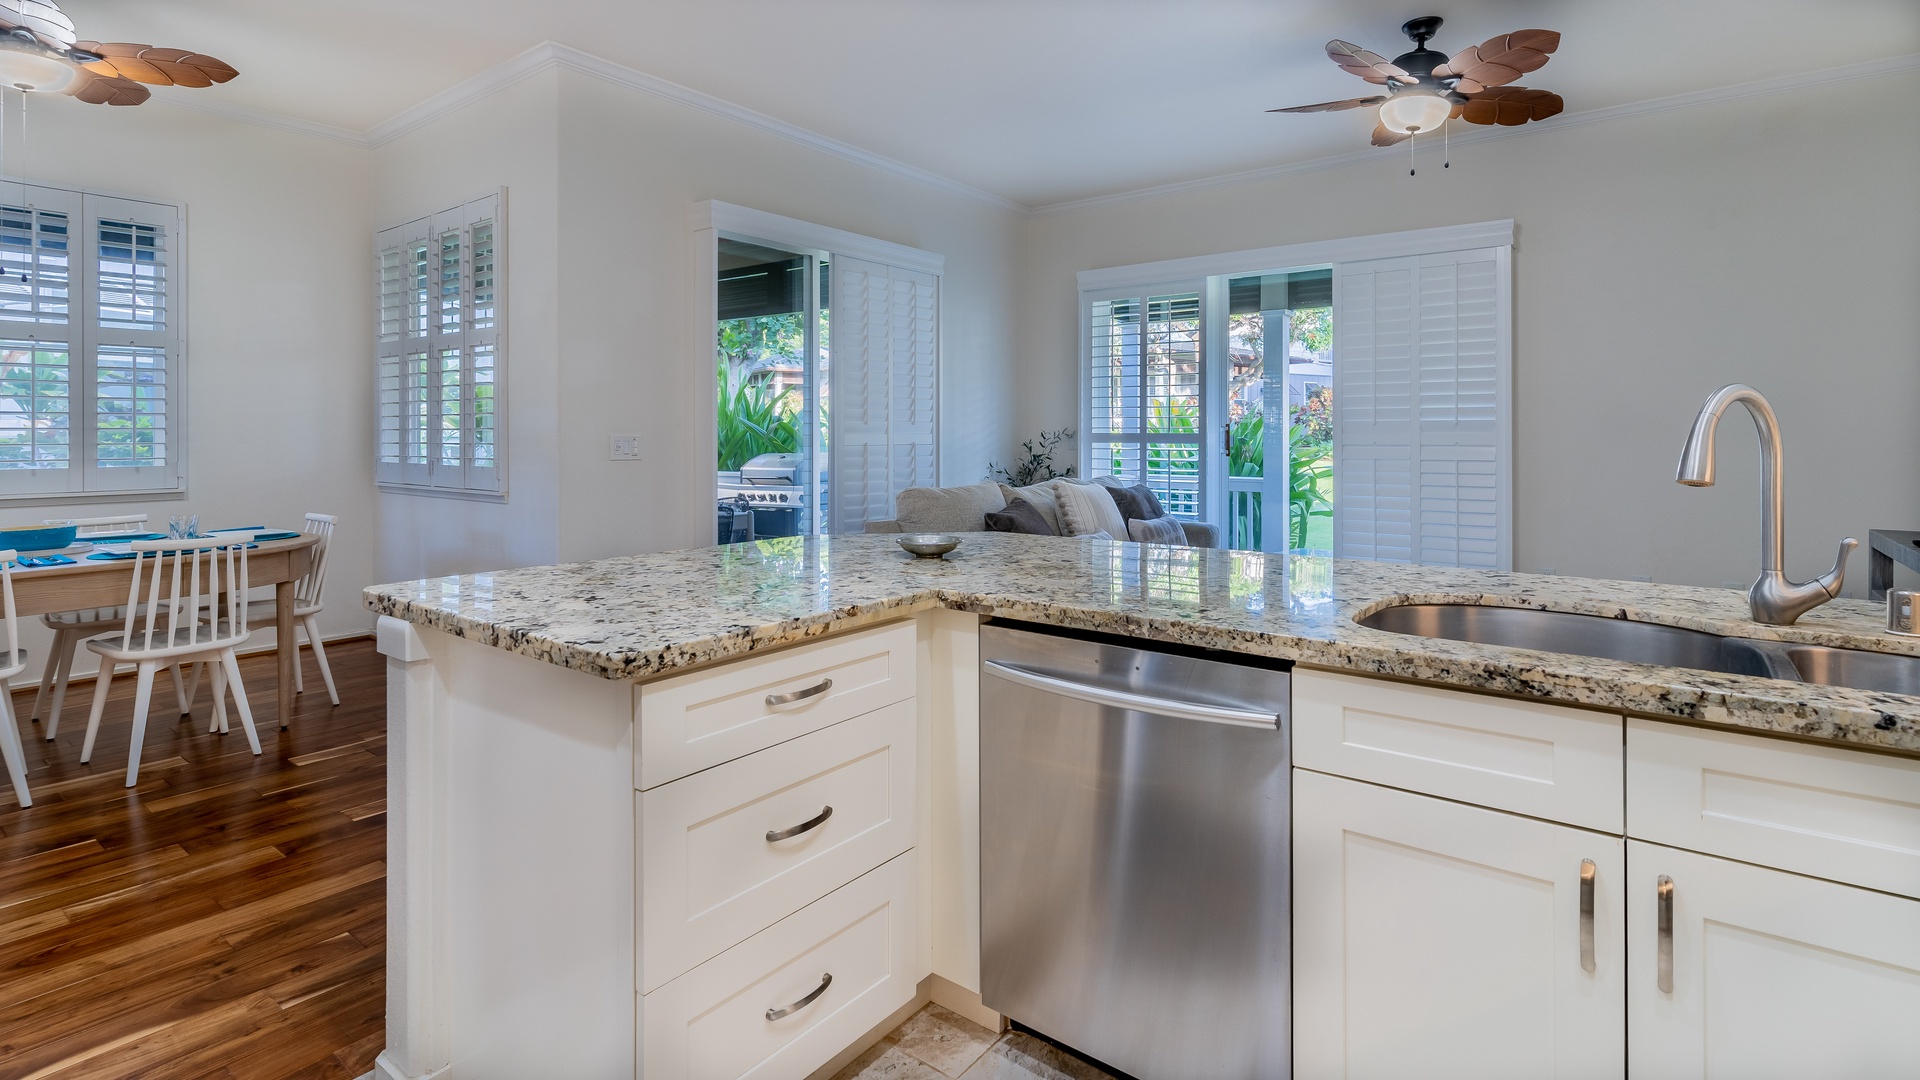 Kapolei Vacation Rentals, Coconut Plantation 1158-1 - The bright open floor plan creates a seamless living space.